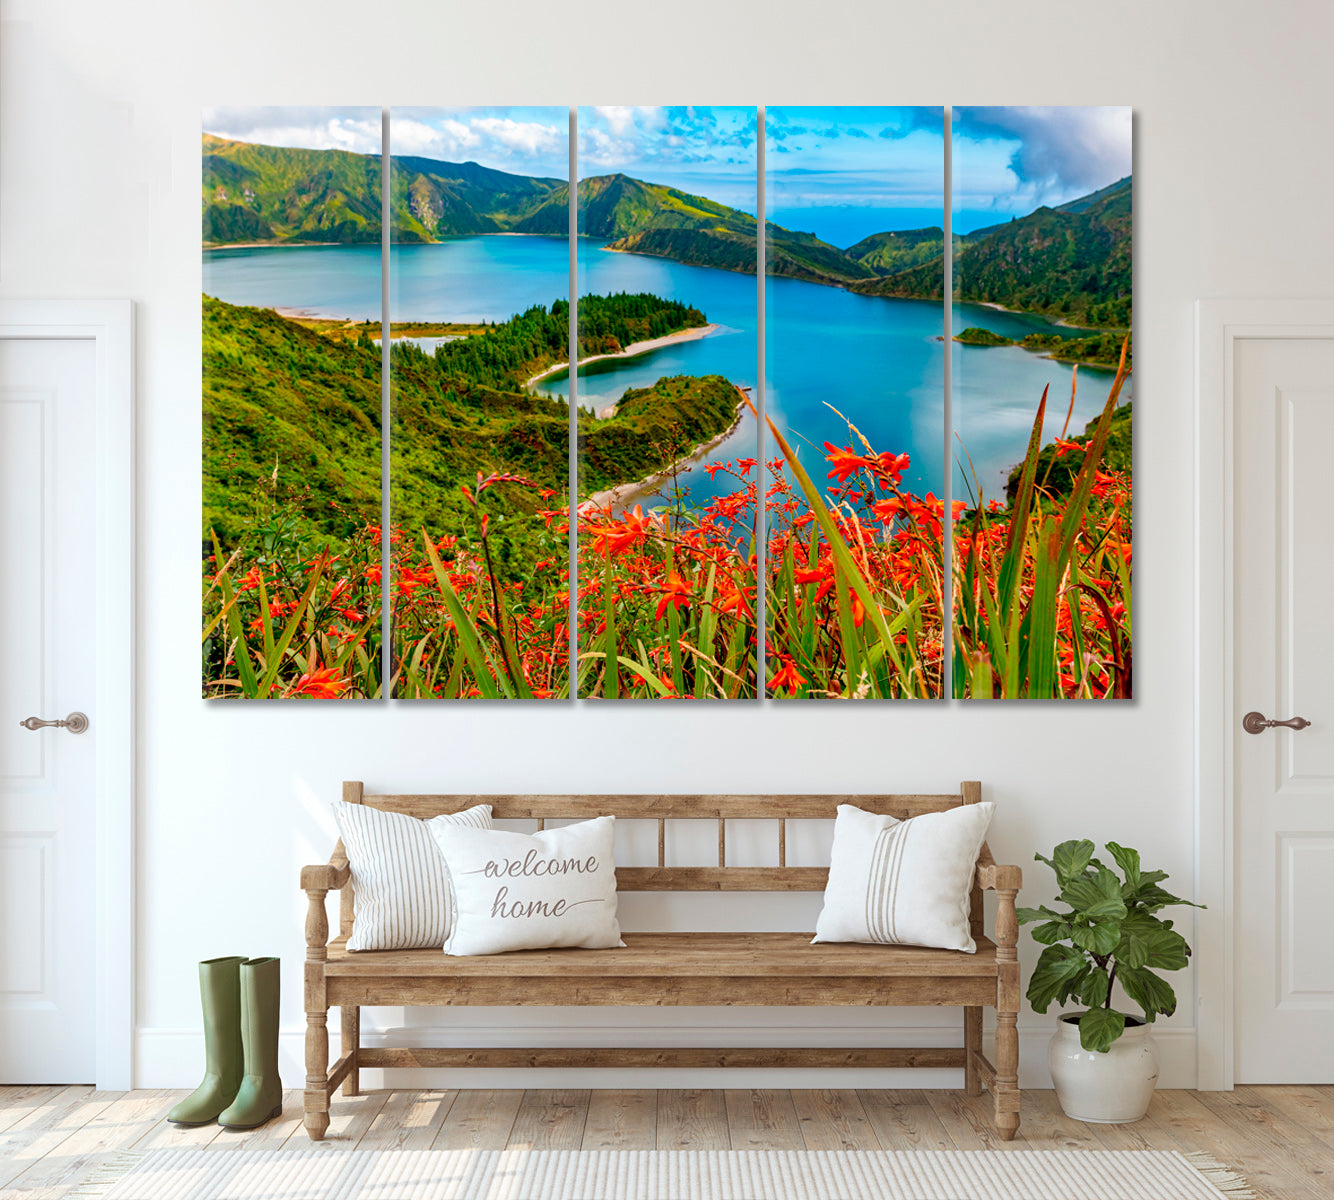 San Miguel Island Azores Canvas Print ArtLexy 5 Panels 36"x24" inches 